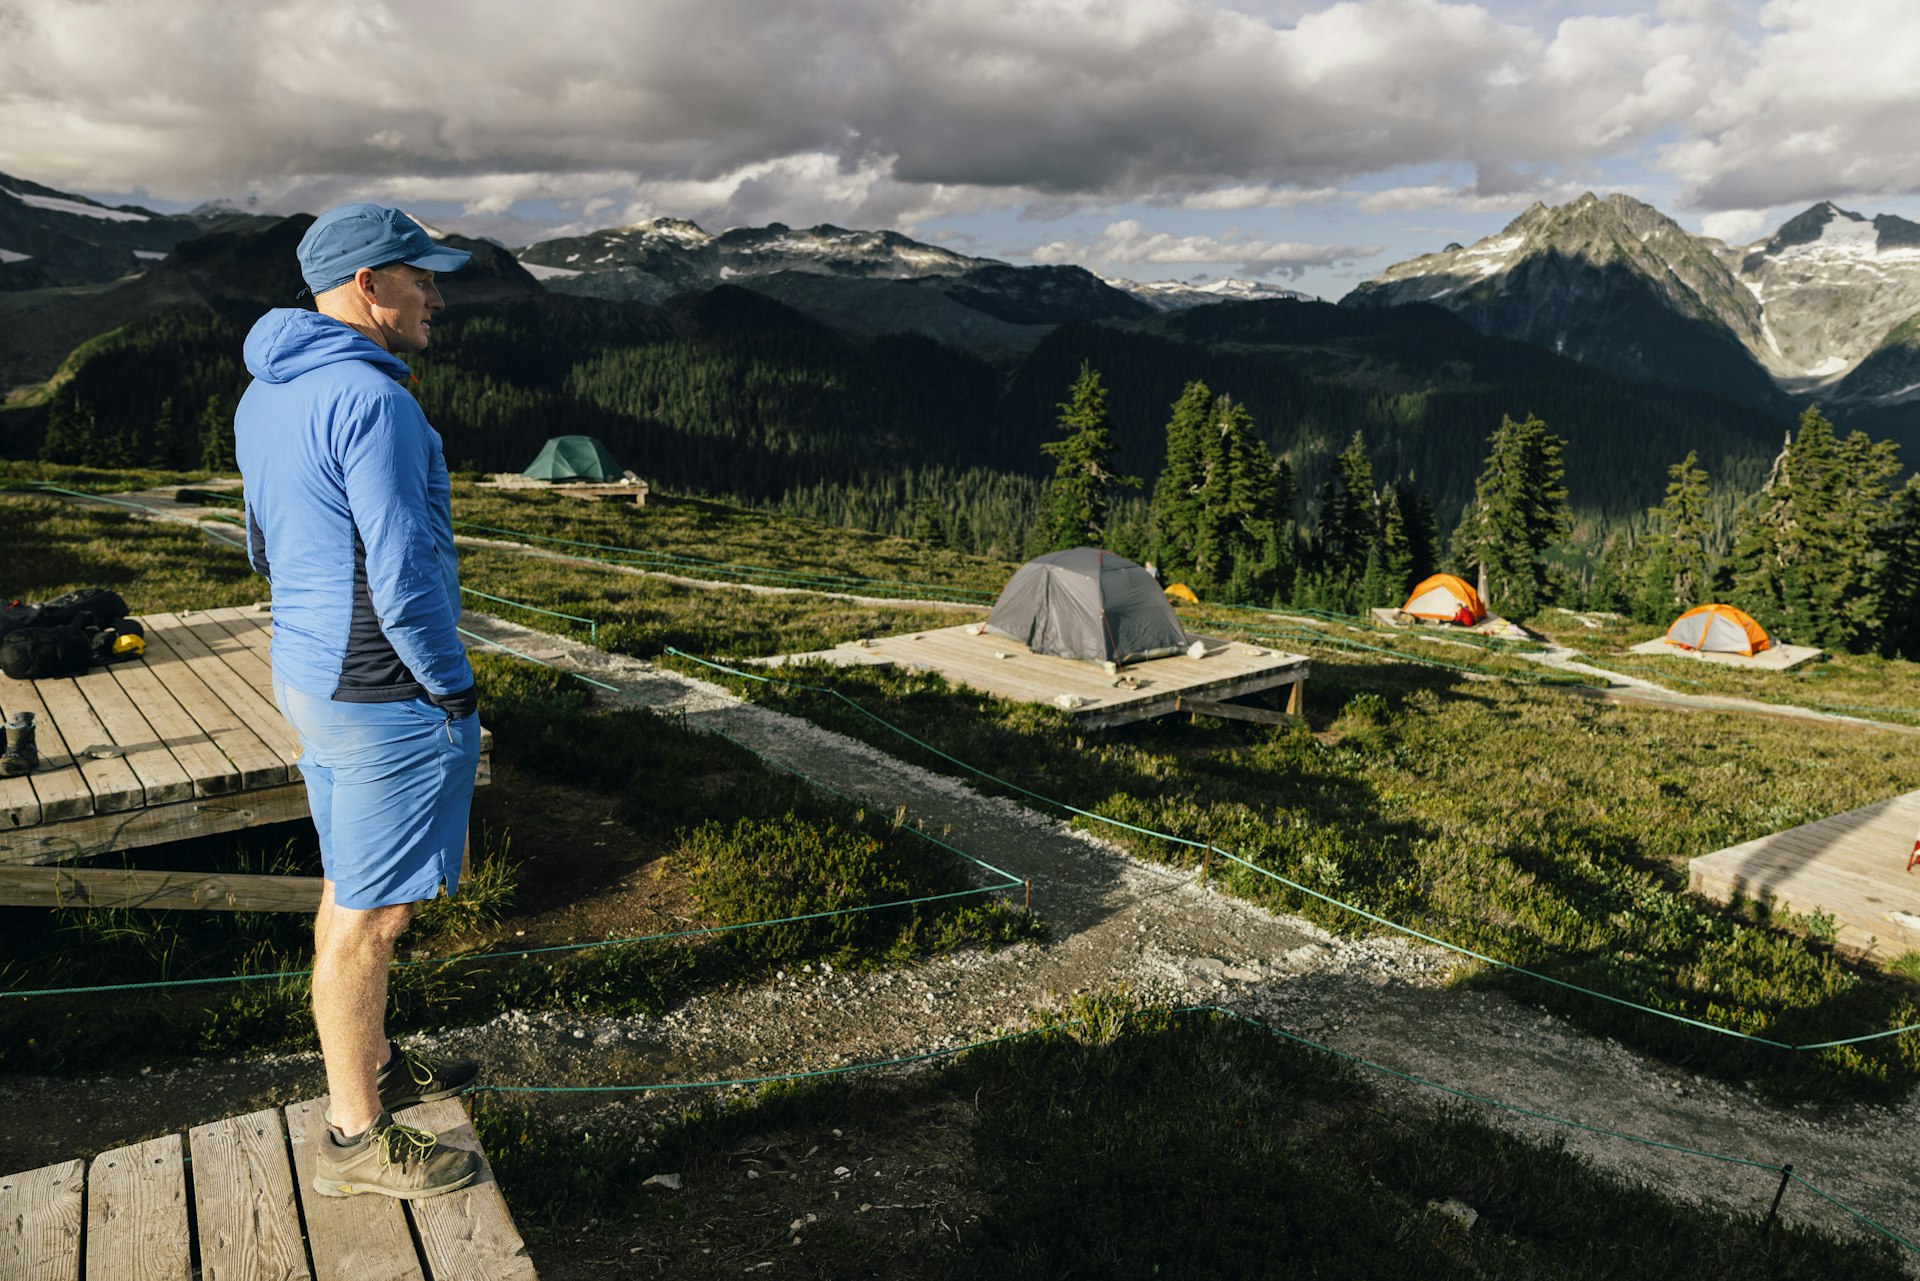 A man at a campground looks out at dramatic alpine scenery near Elfin Lake in Garibaldi Provincial Park, British Columbia, Canada